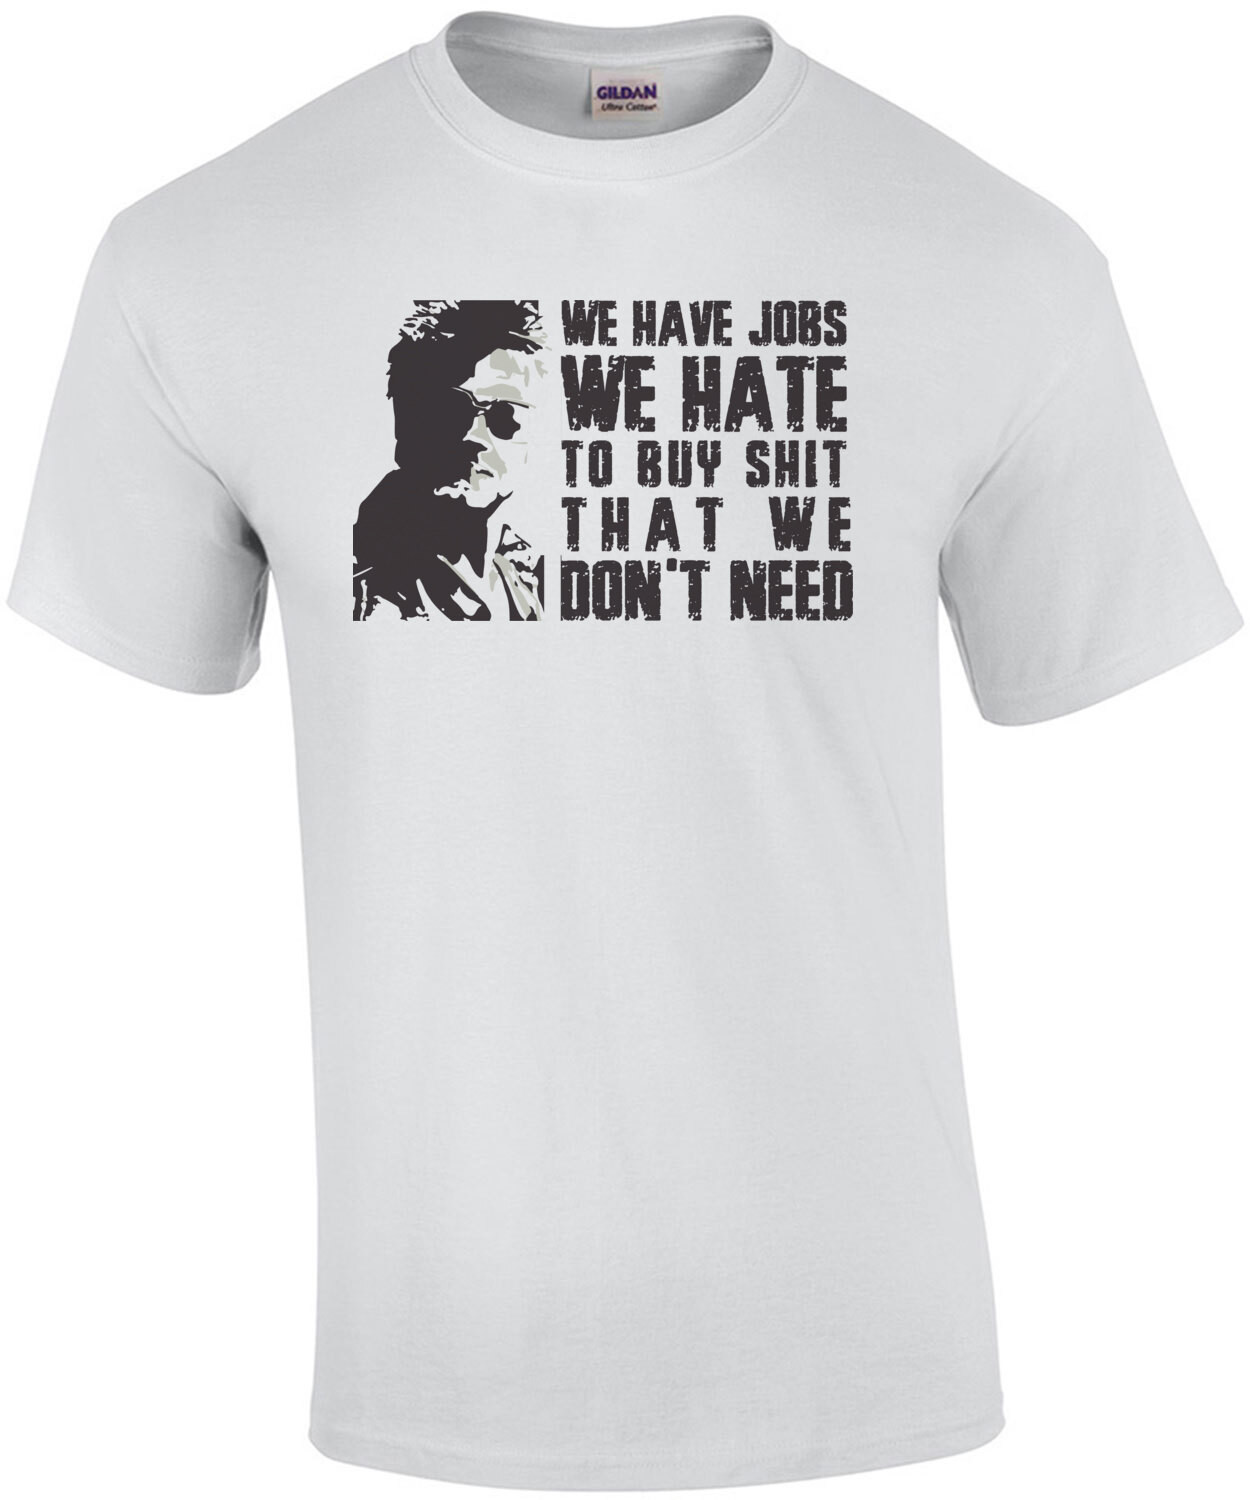 We have jobs we hate to buy shit that we don't need - fight club - Tyler Durden - 90's T-Shirt